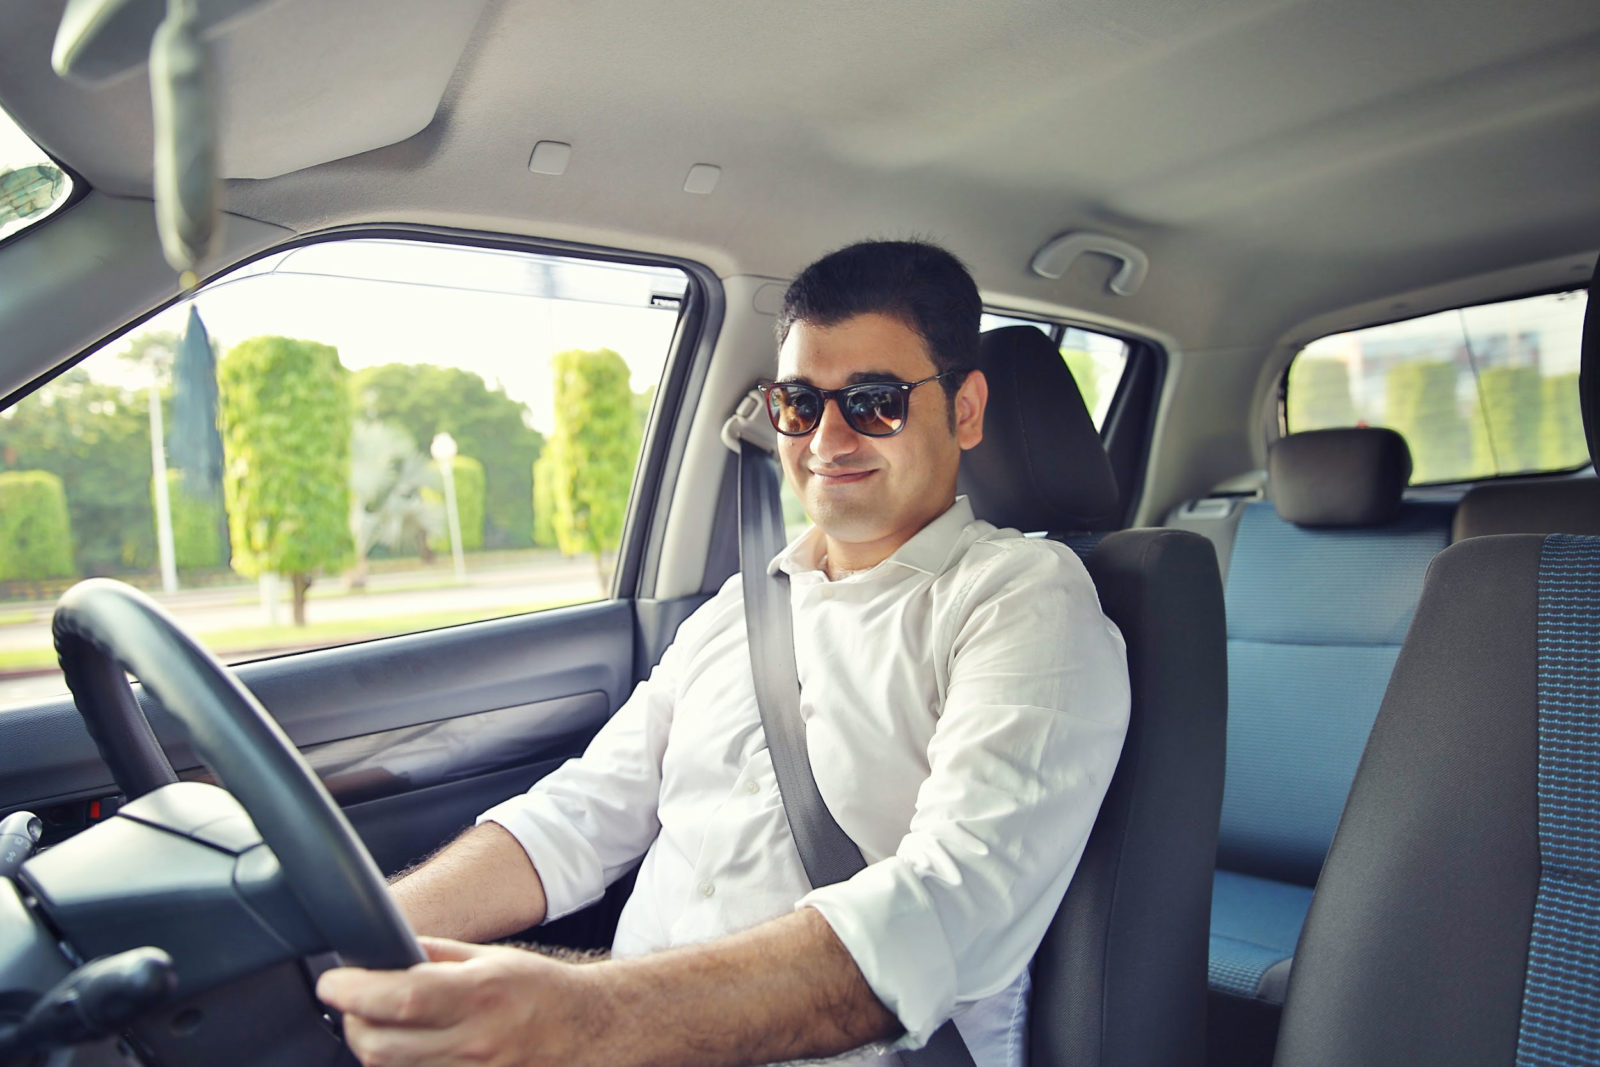 What You Didn’t Know About Careem’s “Captain Care”